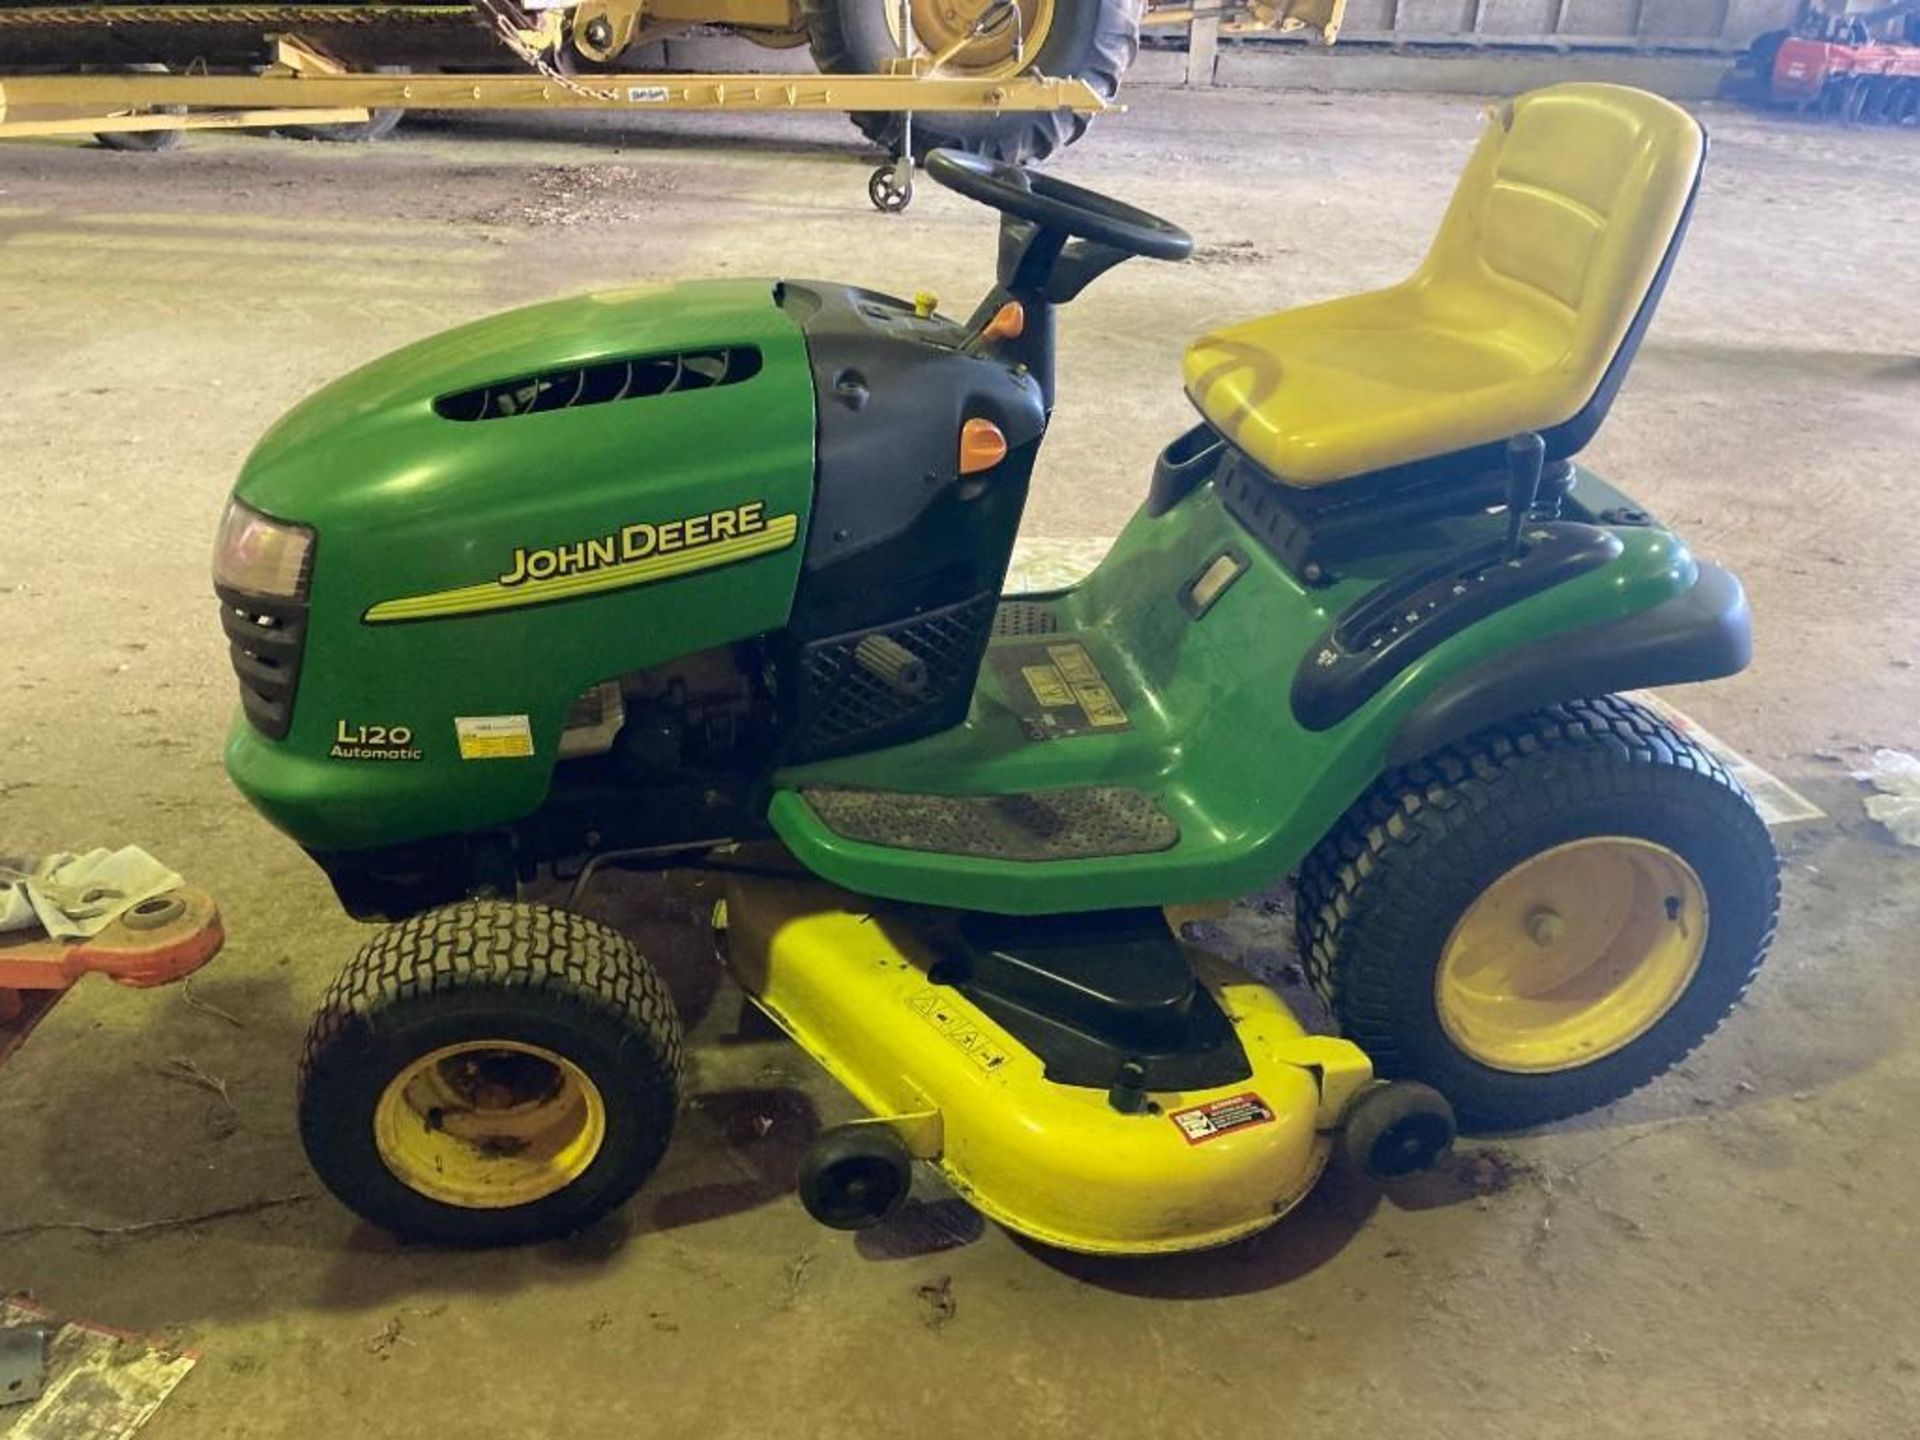 John Deere L120 automatic, ride on lawnmower, 48 inch cut, 410 hours. New cutting deck, bearings and